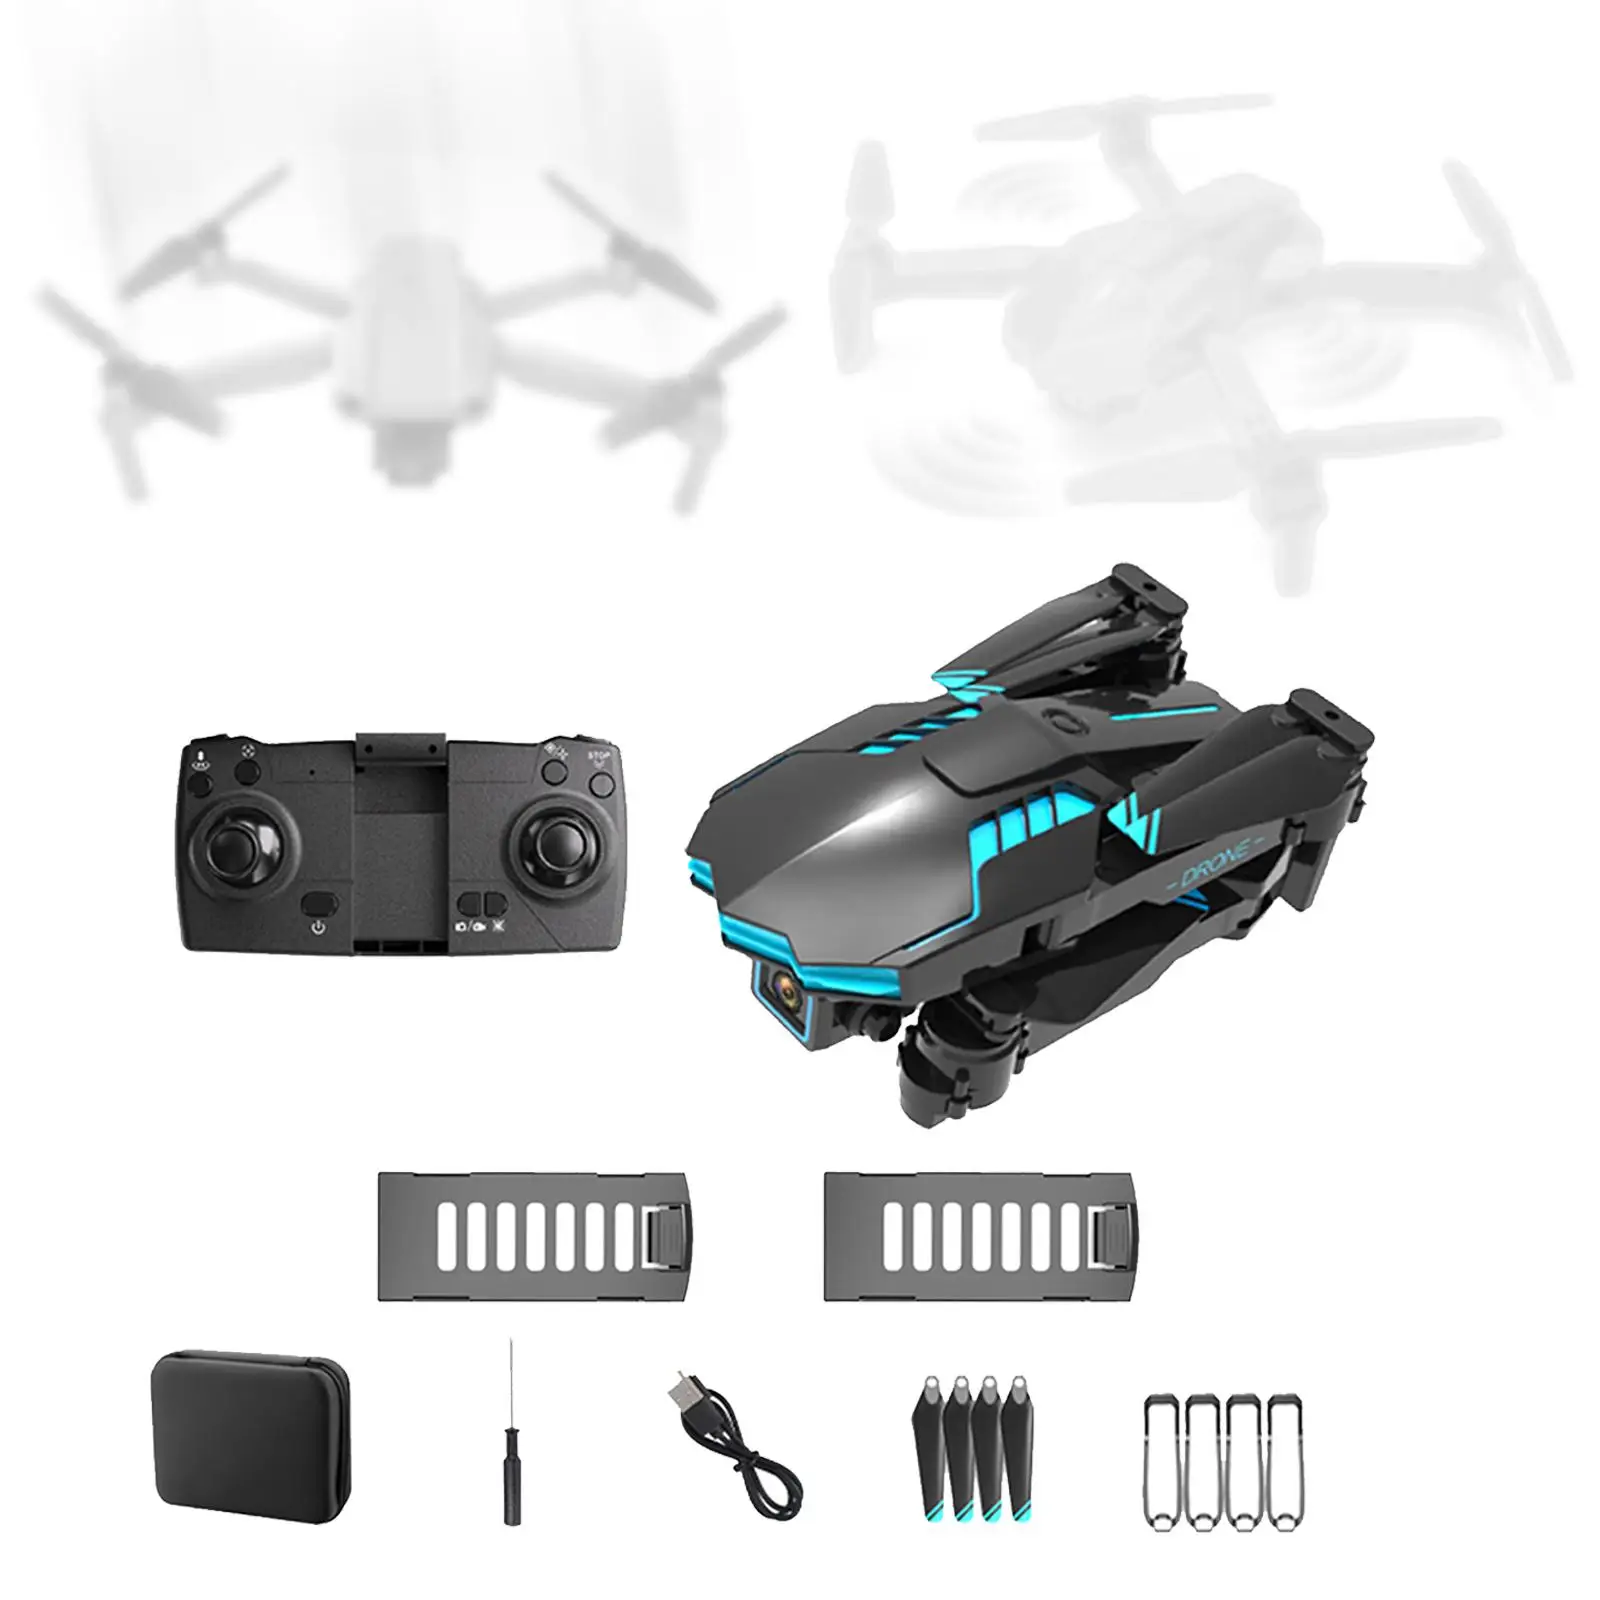 Compact RC Drone Quadcopter 1800mAh Cool Lighting Lightweight 4 Channels